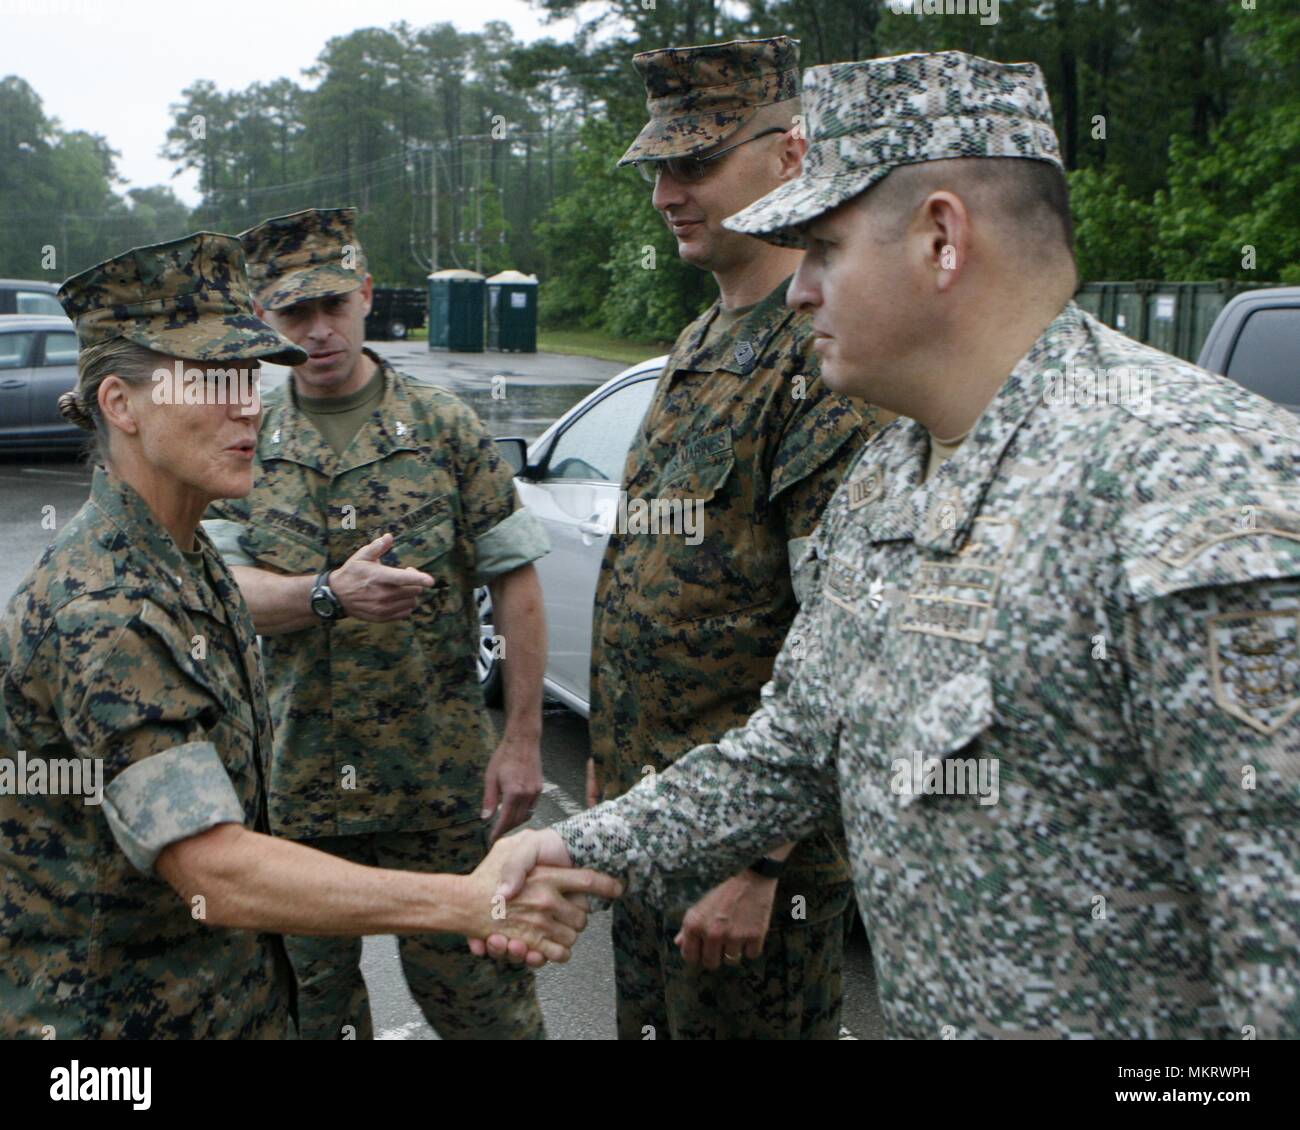 Brigadier Gen. Helen S. Pratt, the 4th Marine Logistics Group commander, greets Colombian Lt. Col. Erick Del Rio, the deputy commander of Special Purpose Marine Air-Ground Task Force - Southern Command, during her visit to Camp Lejeune, North Carolina, May 6, 2018, May 6, 2018. The SPMAGTF is preparing to deploy to Central and South America in June to conduct tailored training and engineering projects alongside security forces in these regions, and will be on standby to provide humanitarian assistance and disaster relief in the event of an emergency. (U.S. Marine Corps photo by Staff Sgt. Fran Stock Photo